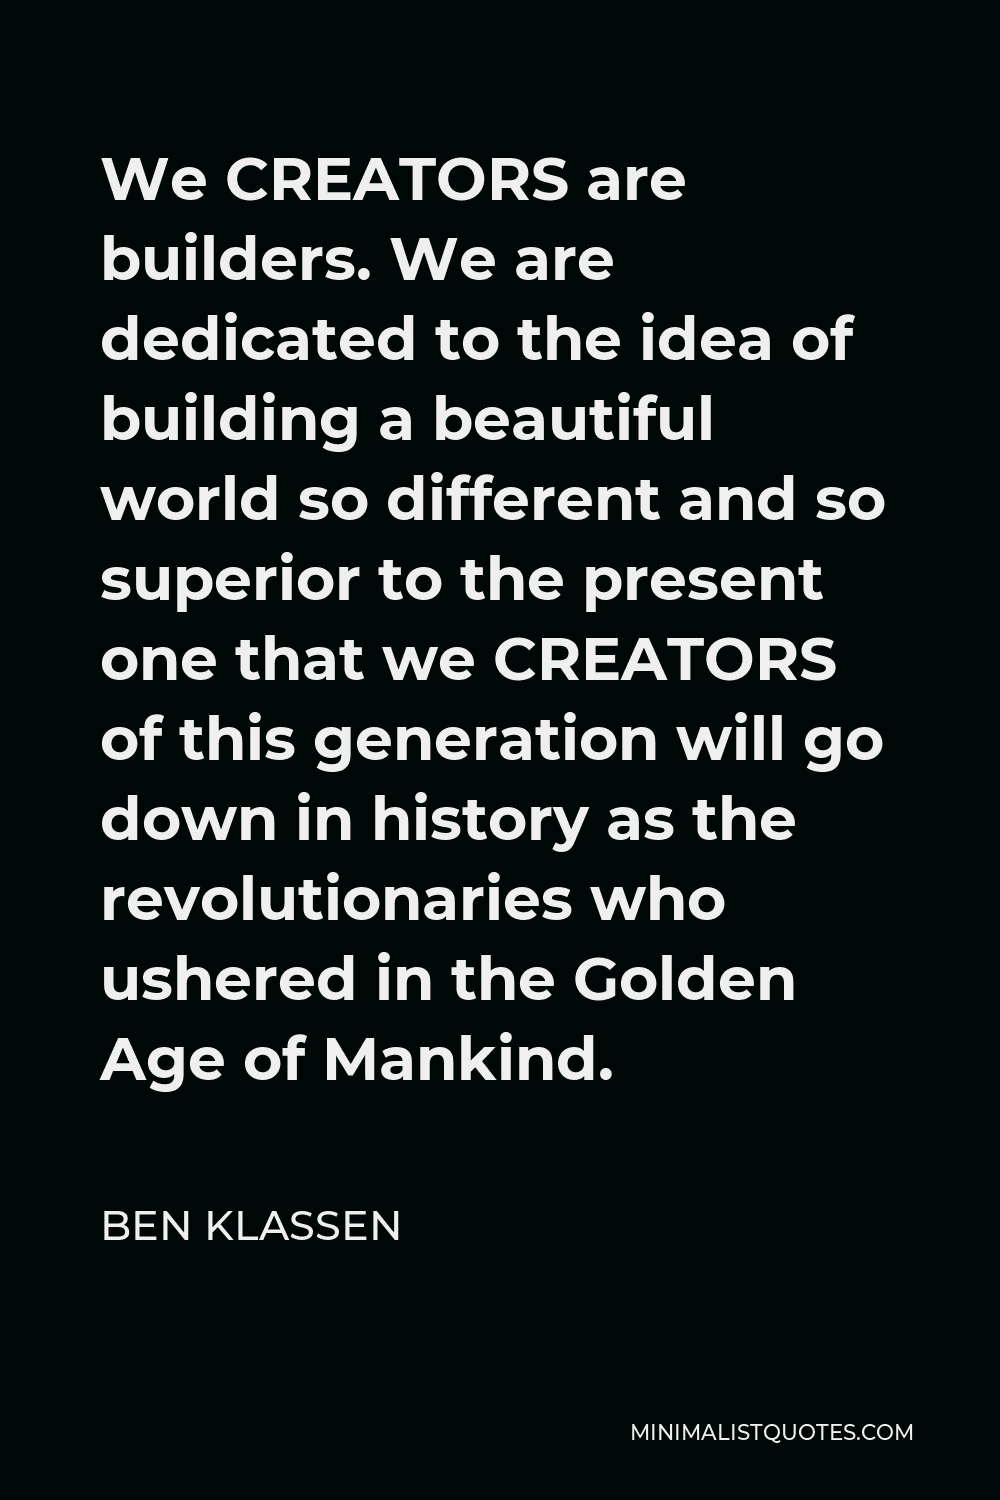 Ben Klassen Quote - We CREATORS are builders. We are dedicated to the idea of building a beautiful world so different and so superior to the present one that we CREATORS of this generation will go down in history as the revolutionaries who ushered in the Golden Age of Mankind.